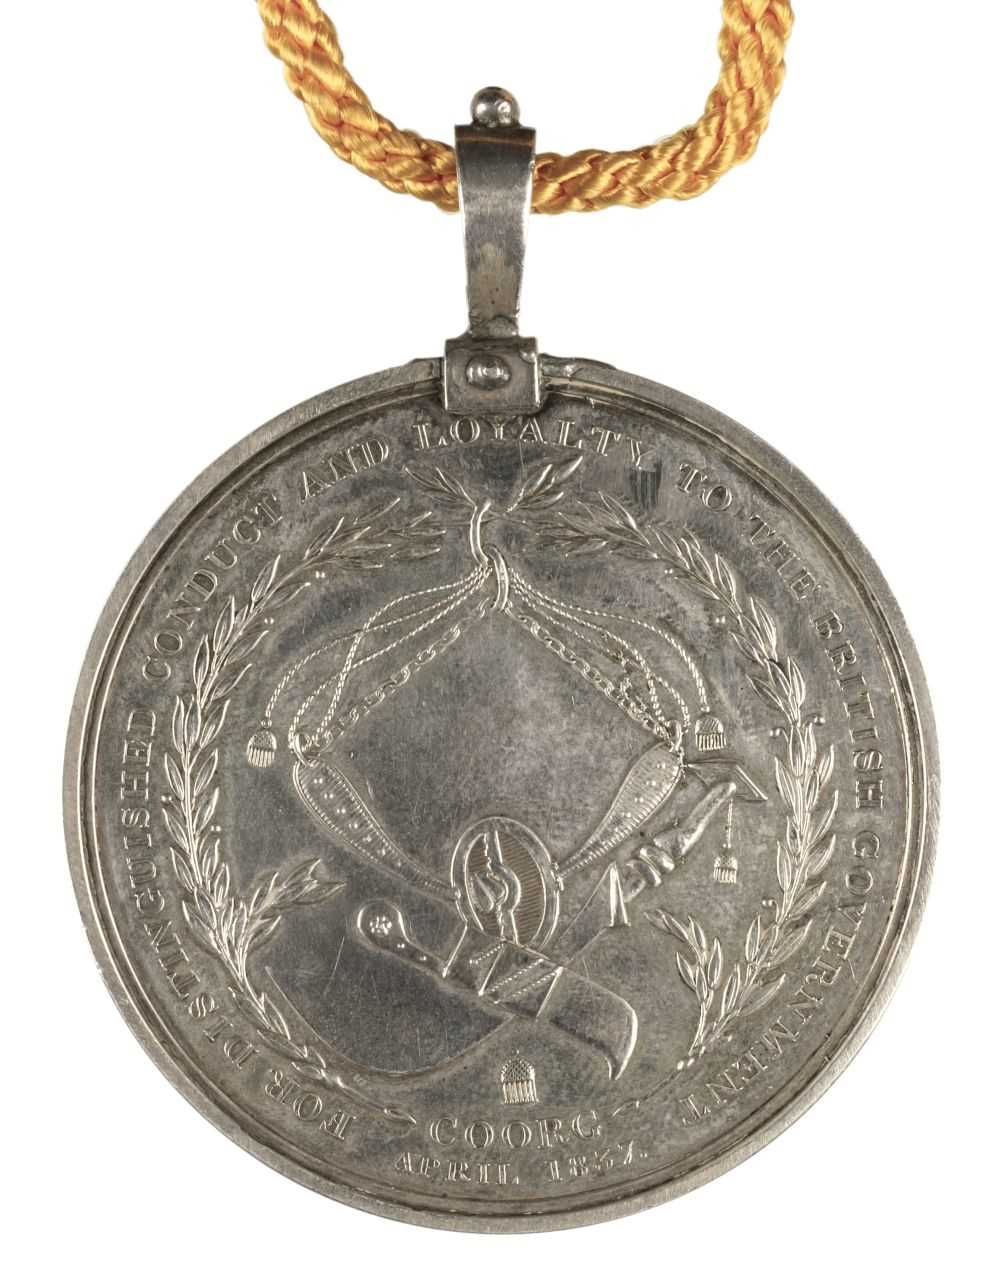 Lot 375 - Honourable East India Company Medal for the Coorg Rebellion 1837